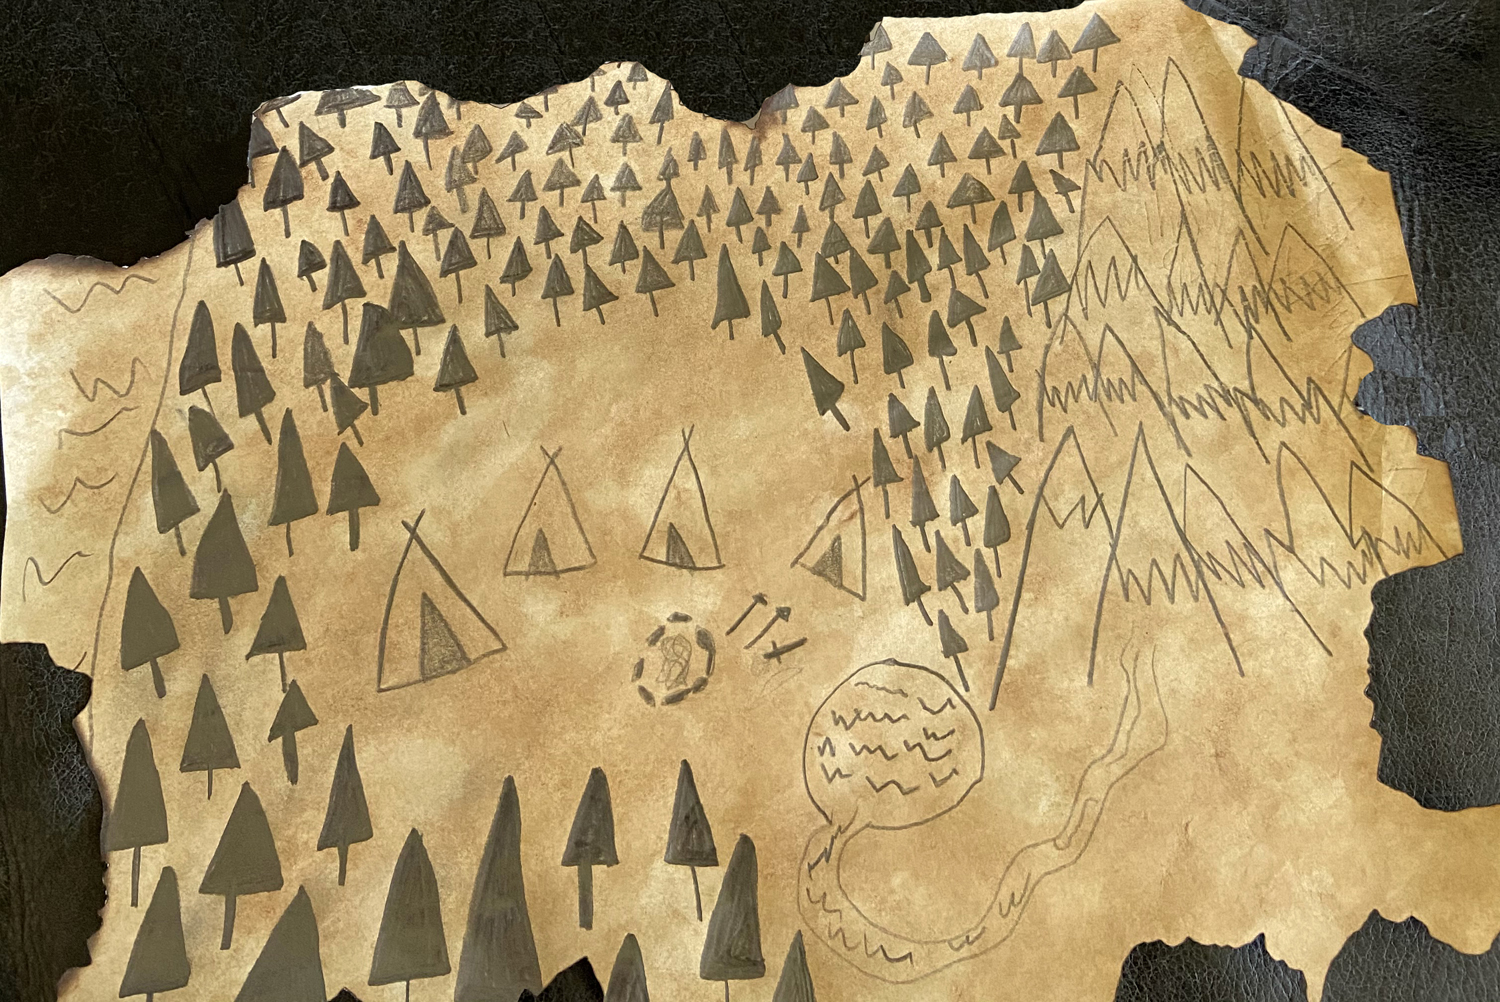 Illustration of Mesolithic map showing several trees and mountains